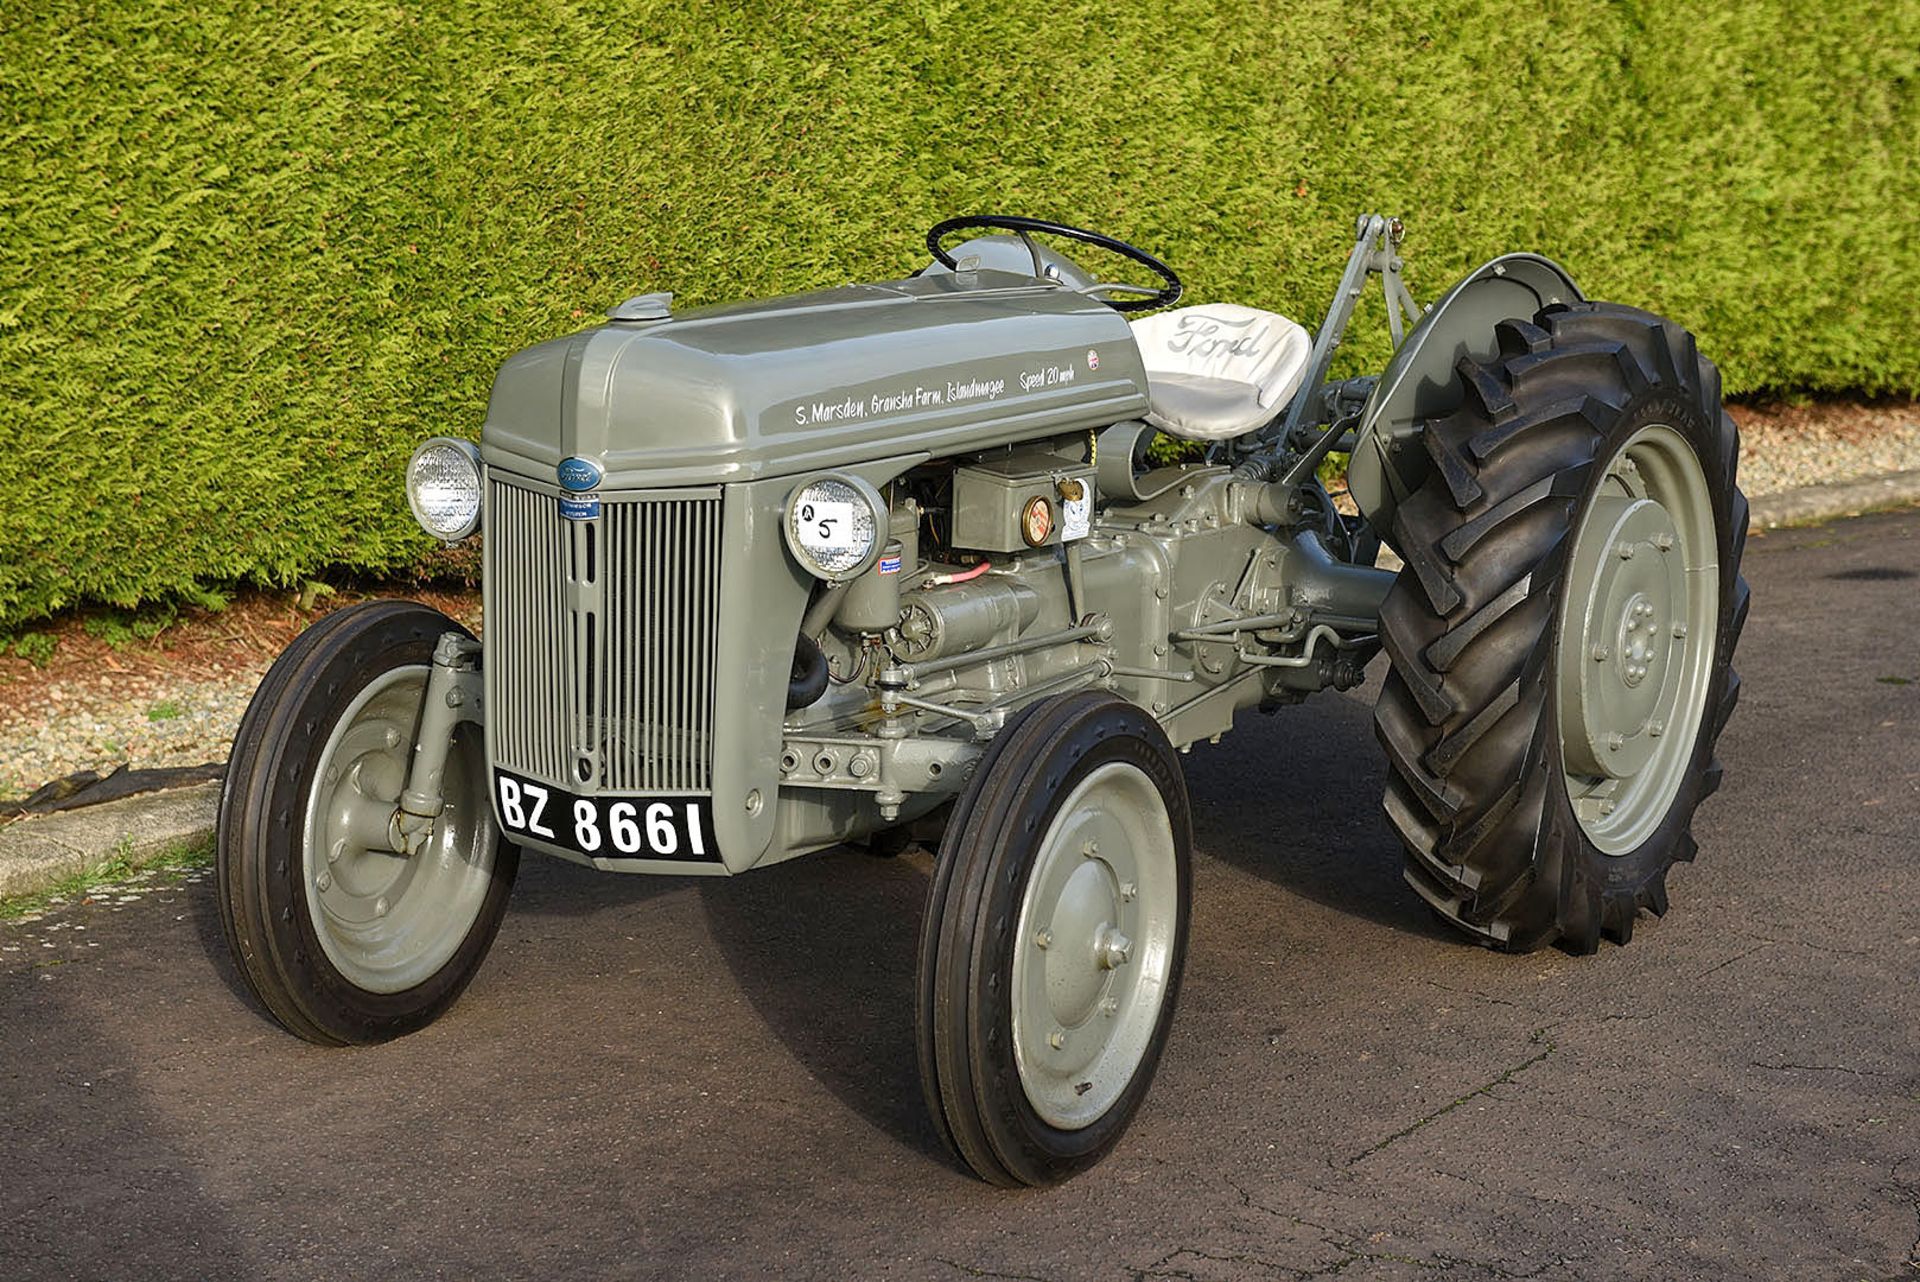 BZ 8661 1943 Ford Ferguson tractor c/w a Ford 2 furrow plough - Image 3 of 25